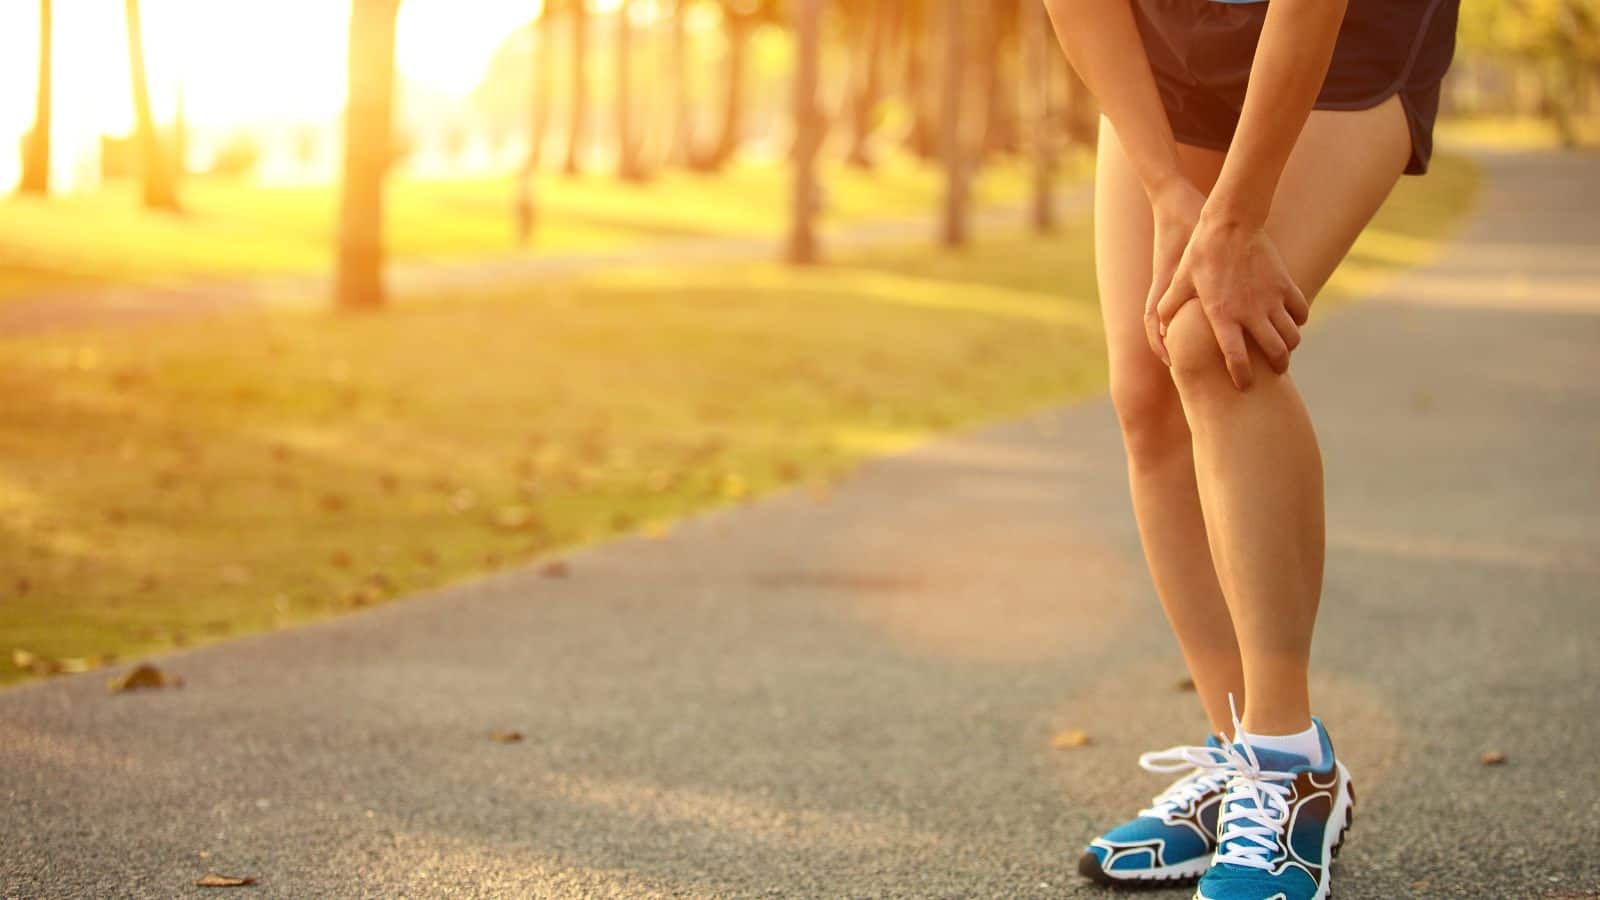 Don't let your leg pain become worse! 7 tips to deal with it